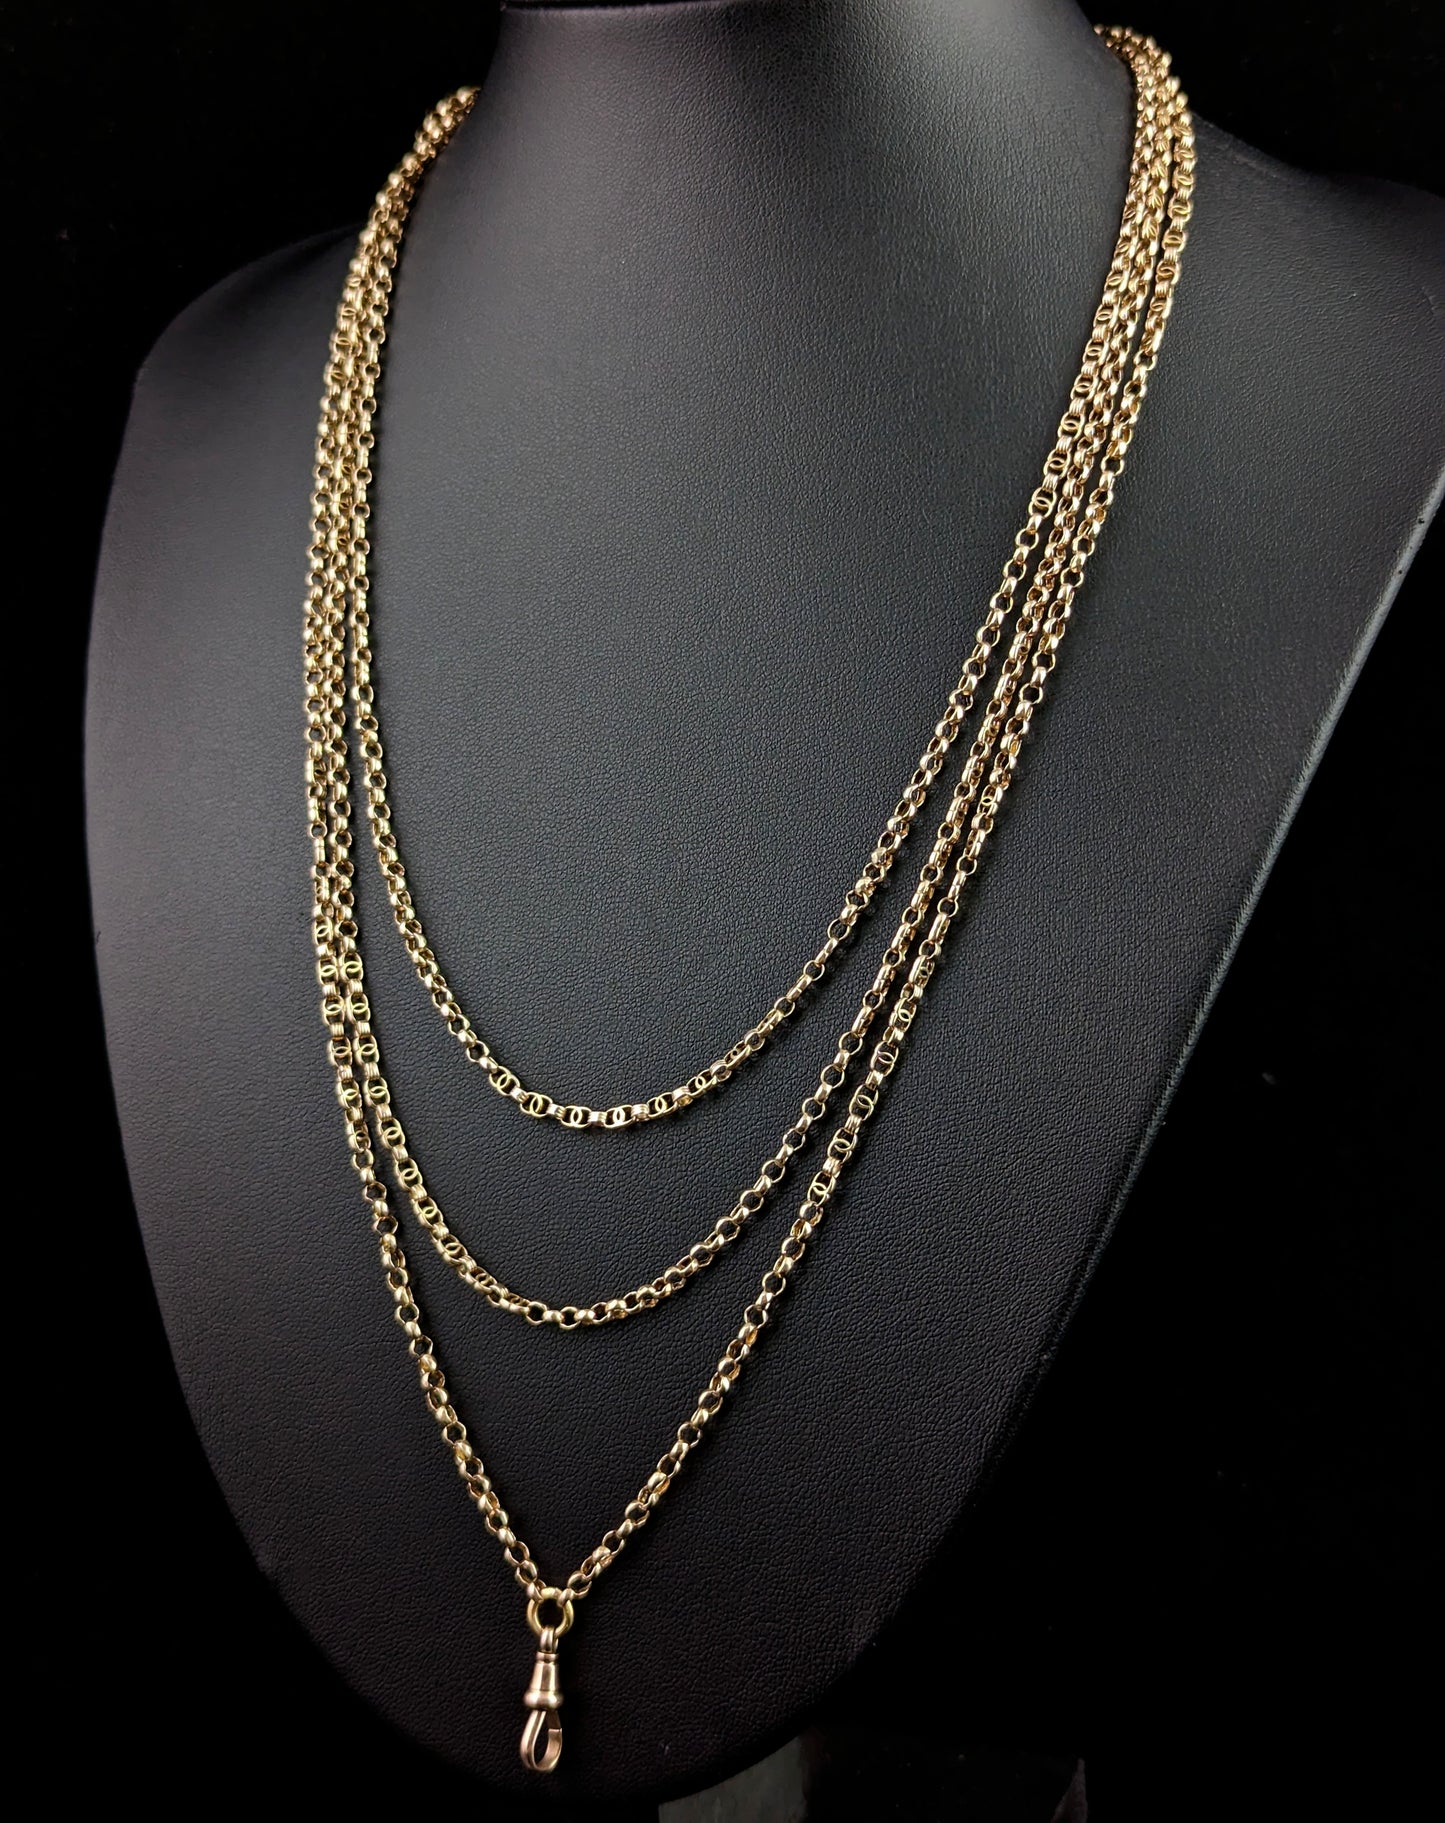 Antique 9ct gold long chain, longuard, muff chain necklace, Victorian